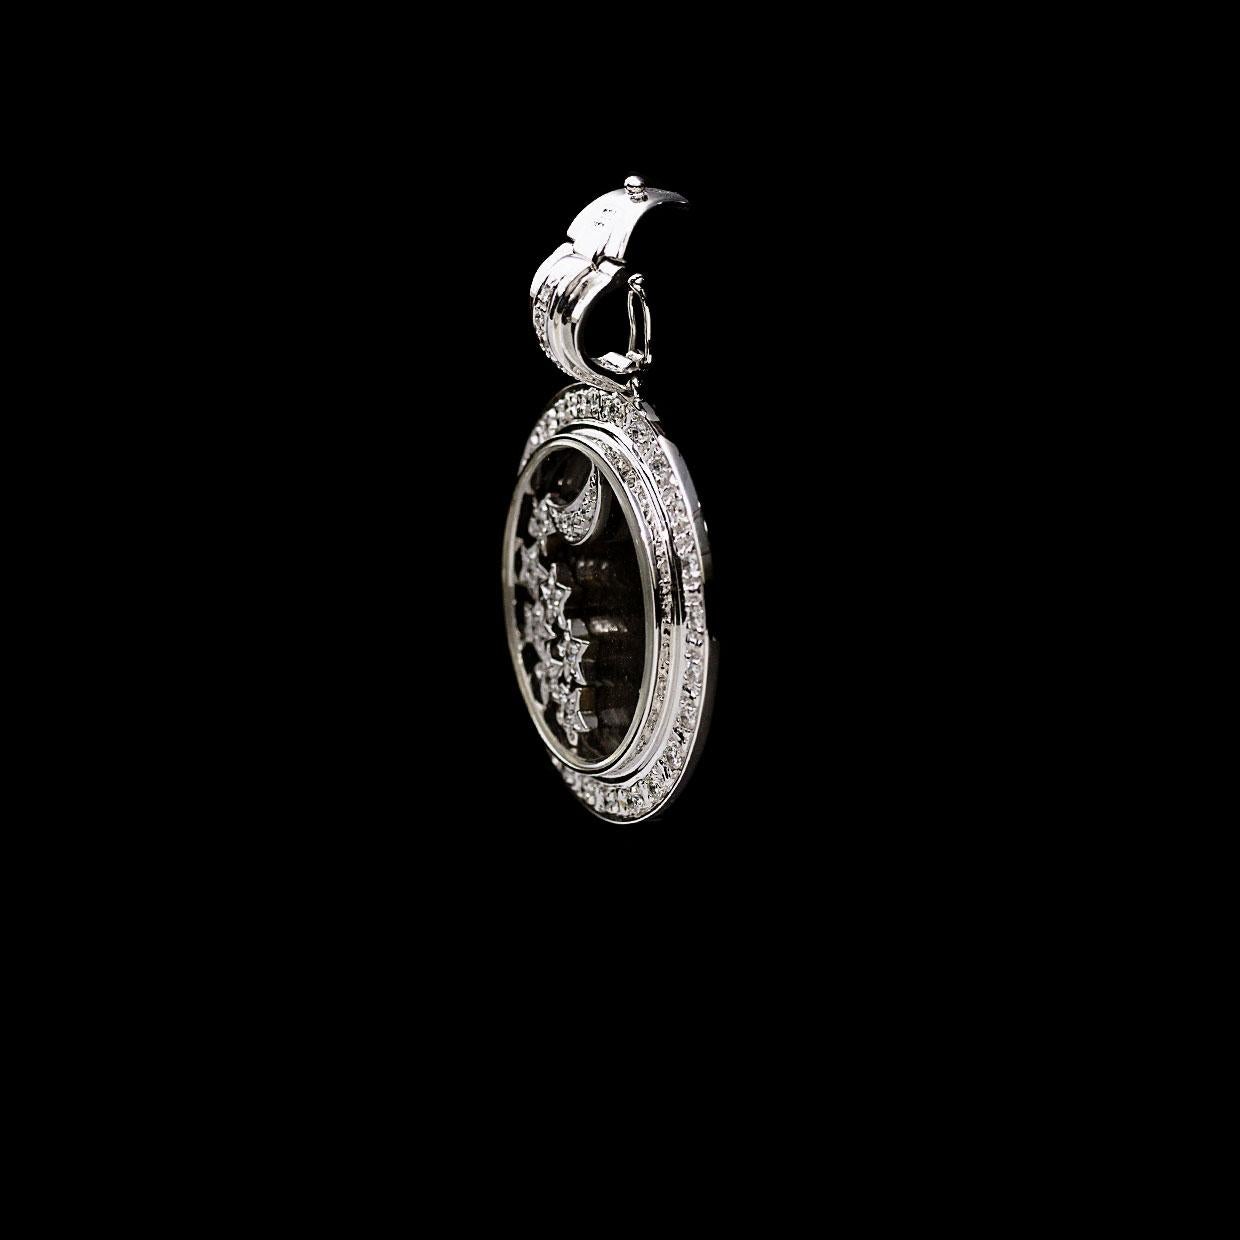 A stunning & fun diamond pendant, this piece is inspired by Chopard's Happy Diamonds Collection. It features scintillating round brilliant cut diamonds that are set into white gold moon & star shapes that are freely floating inside the pendant. The